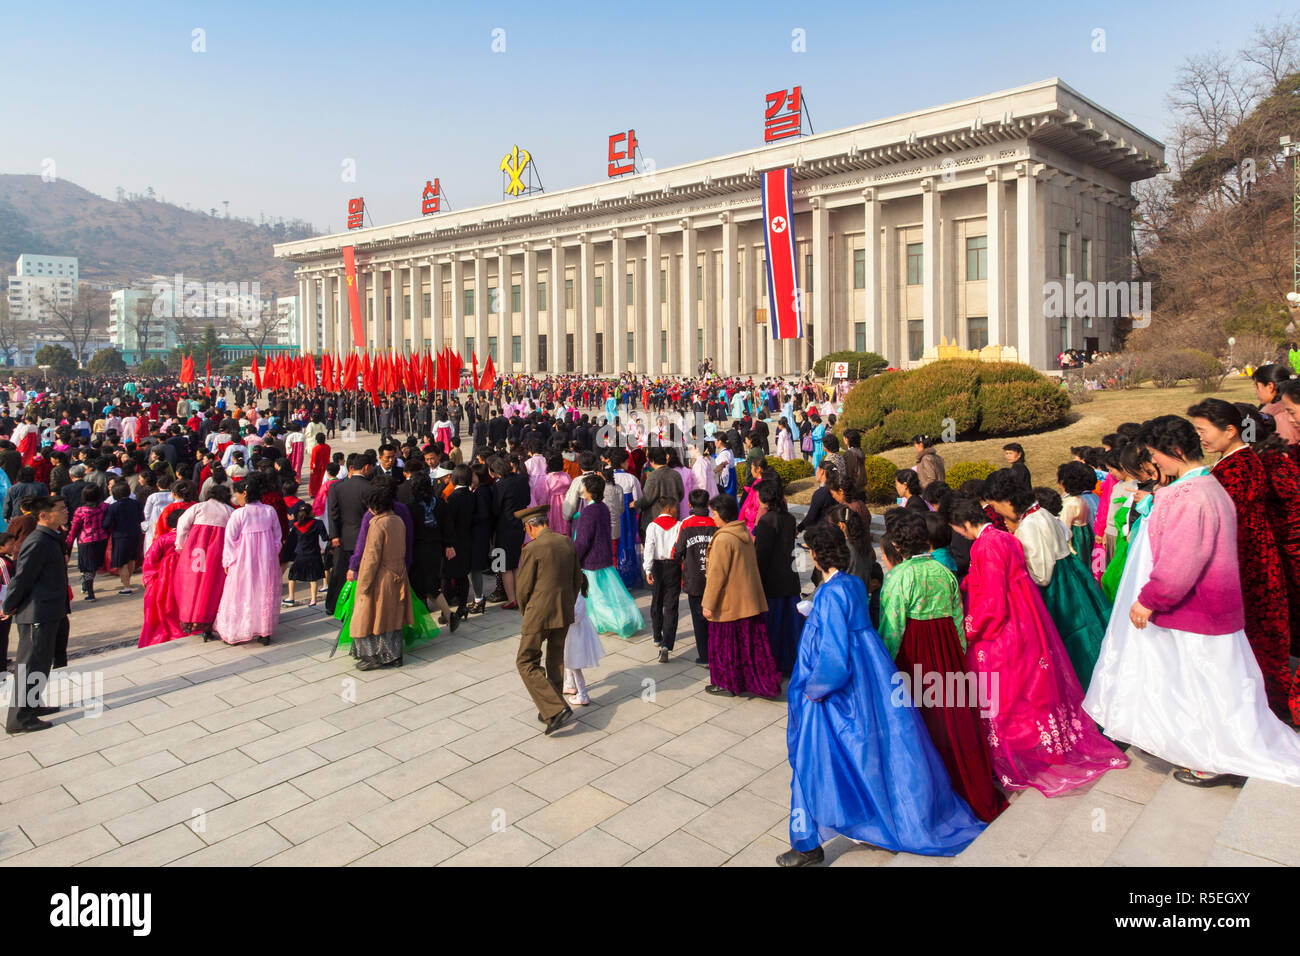 Democratic Peoples's Republic of Korea (DPRK), North Korea, Pyongshong, satellite city outside of Pyongyang, celebrations on the 100th anniversay of the birth of President Kim II Sung on April 15th 2012 Stock Photo